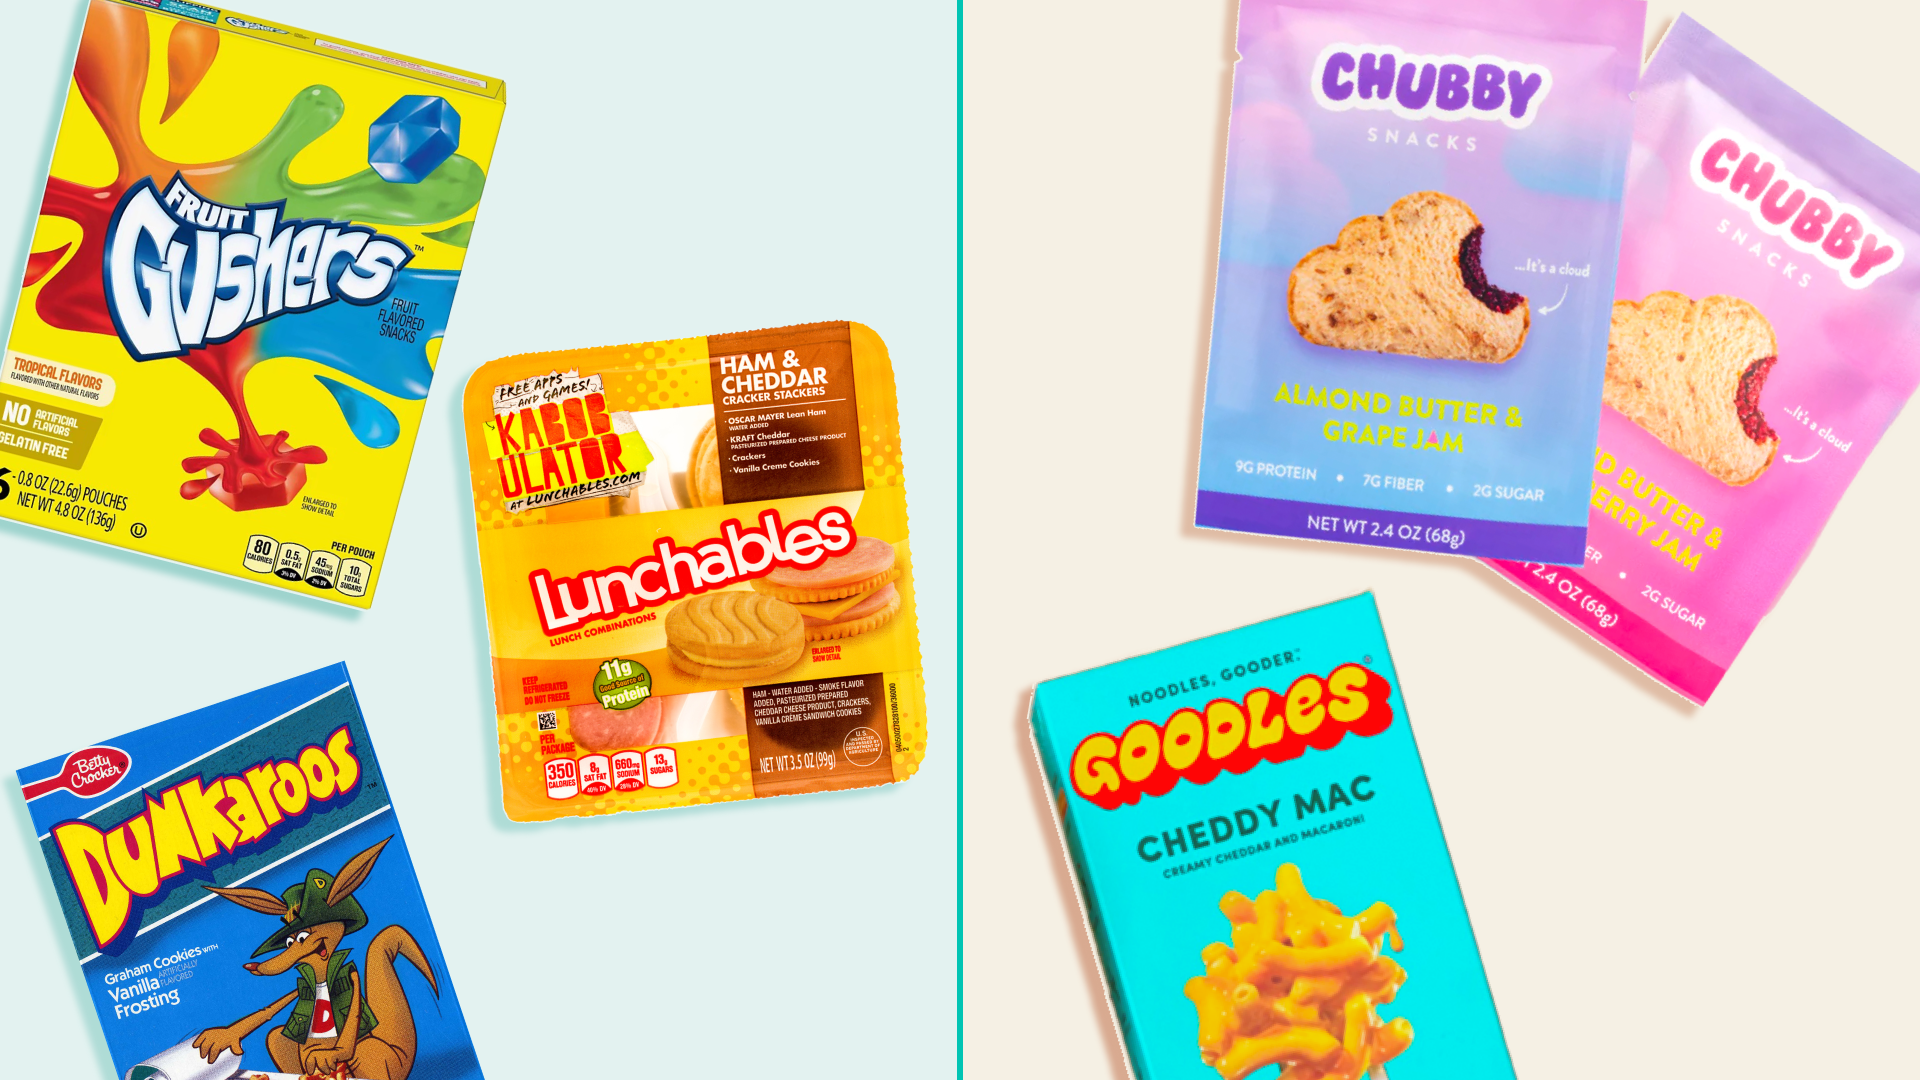 Back to School Trends in the ‘90s vs Today: Lunch